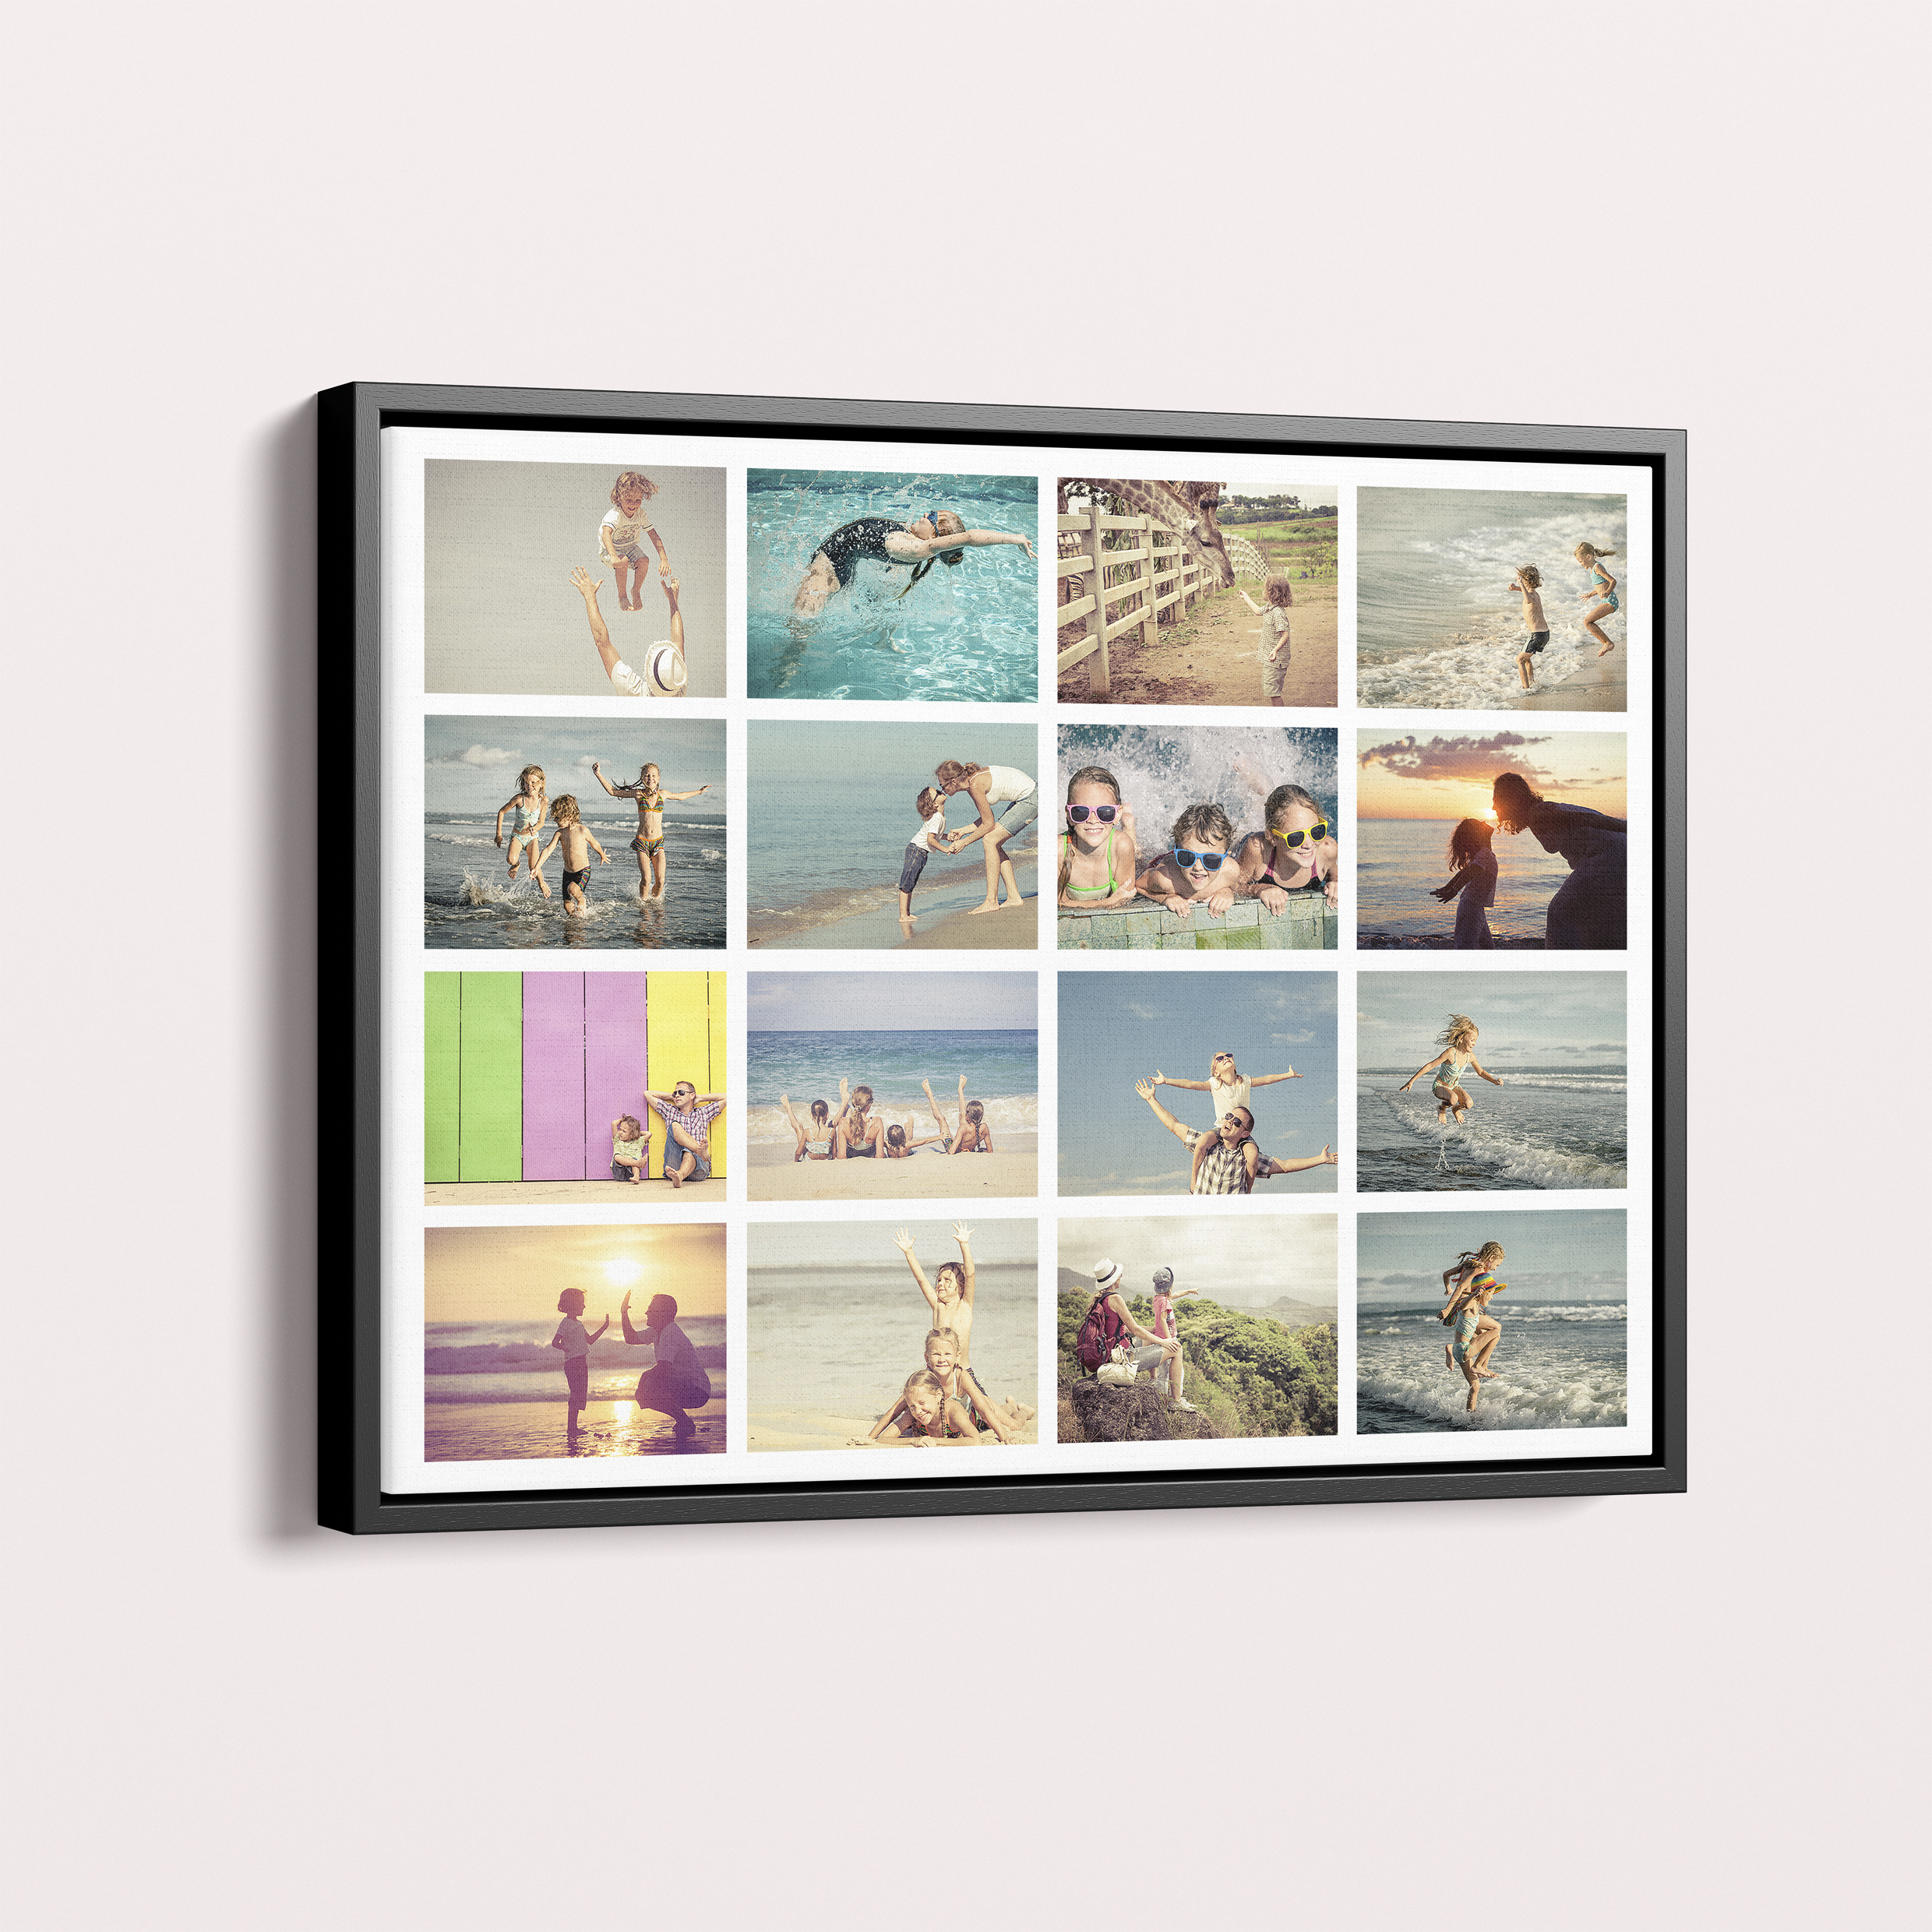  Personalized Jumble Collage Framed Photo Canvas - Create a stunning collage of memories with ample space for 10+ photos, showcasing a multitude of cherished moments.